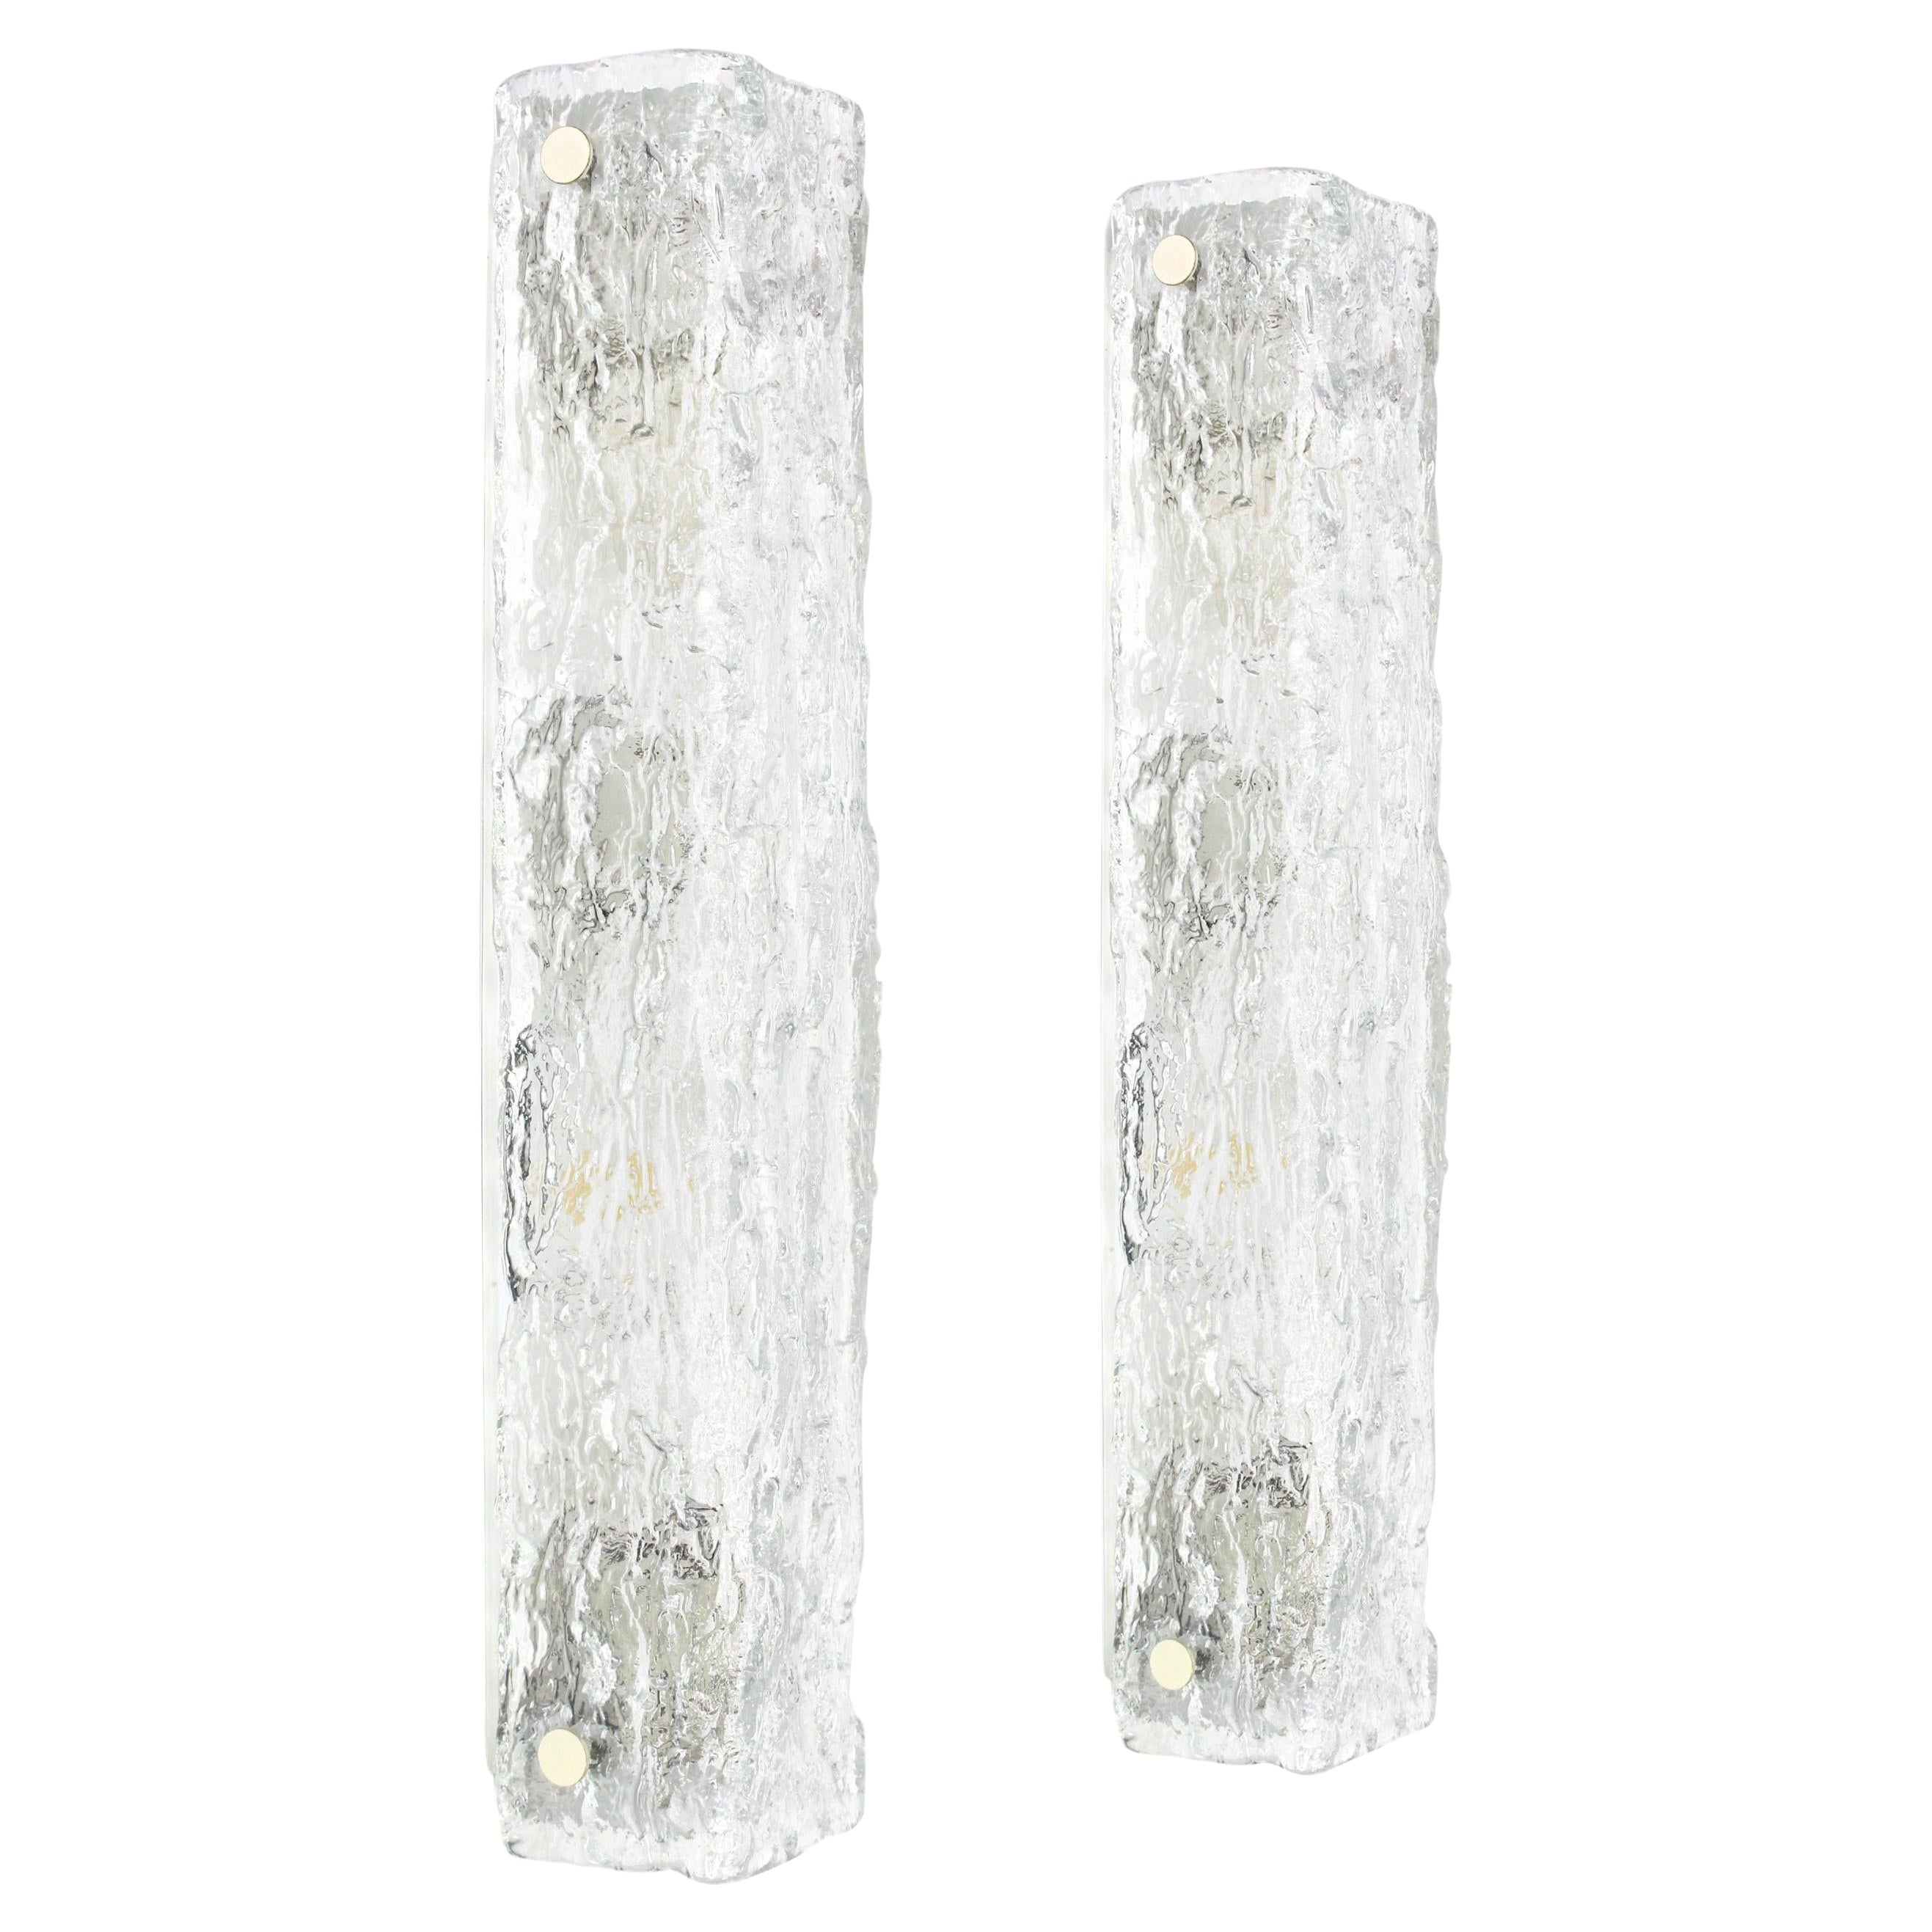 1 of 4 -Set of 2 Large Murano Ice Glass Vanity Sconces by Kaiser, Germany, 1970s For Sale